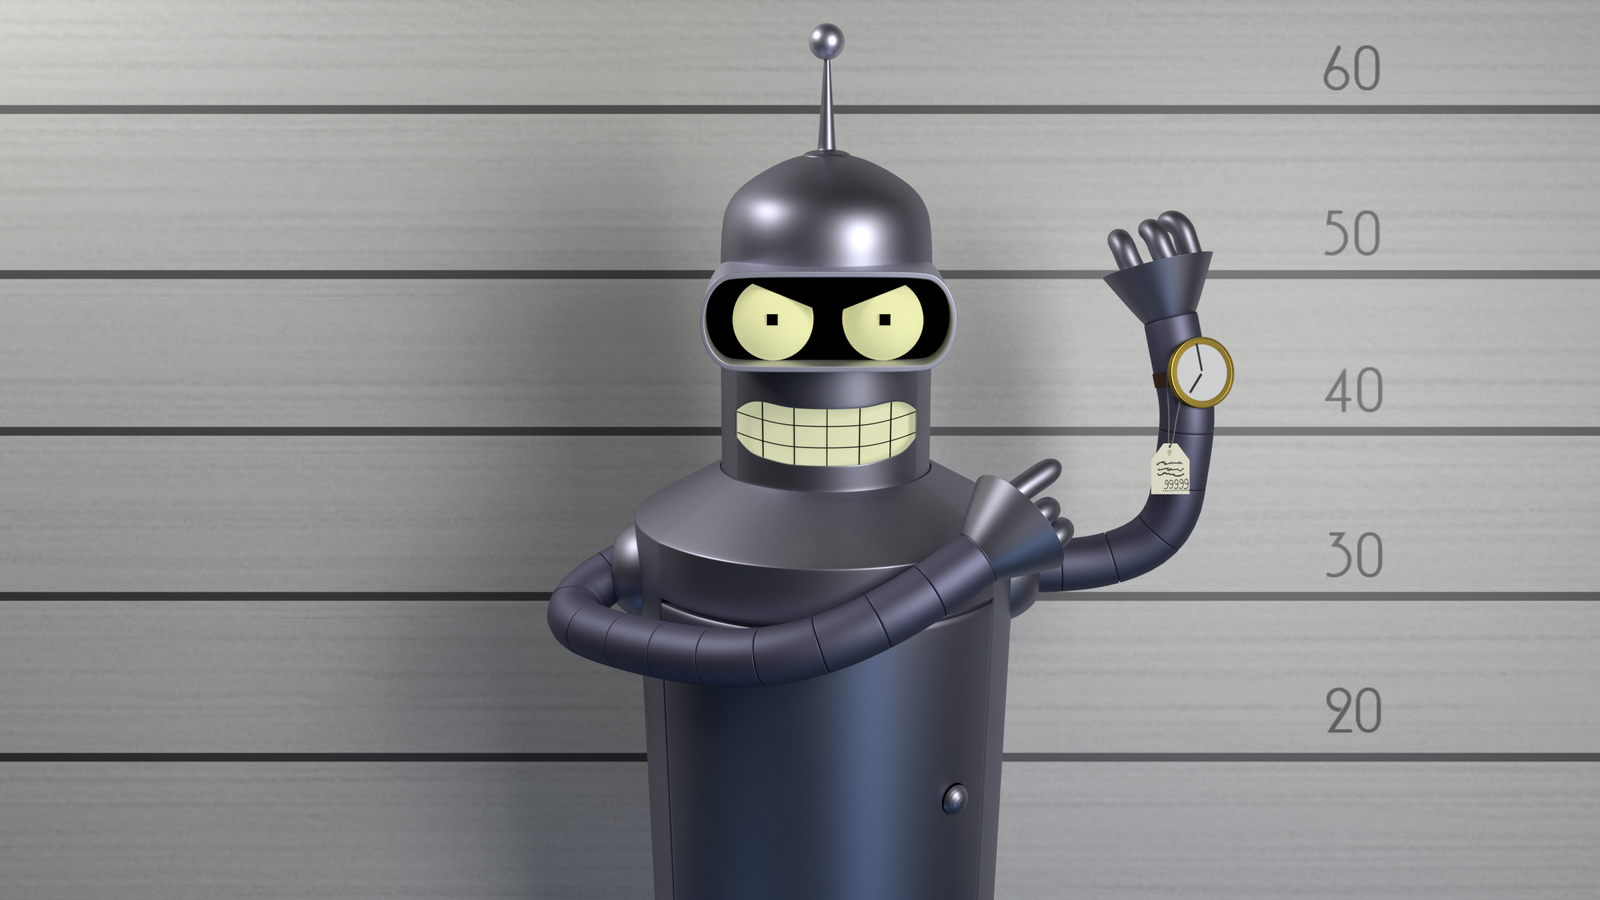 Kiss my shiny ass! - My, Blender, Bender, 3D blender, 3D, Picture with text, 